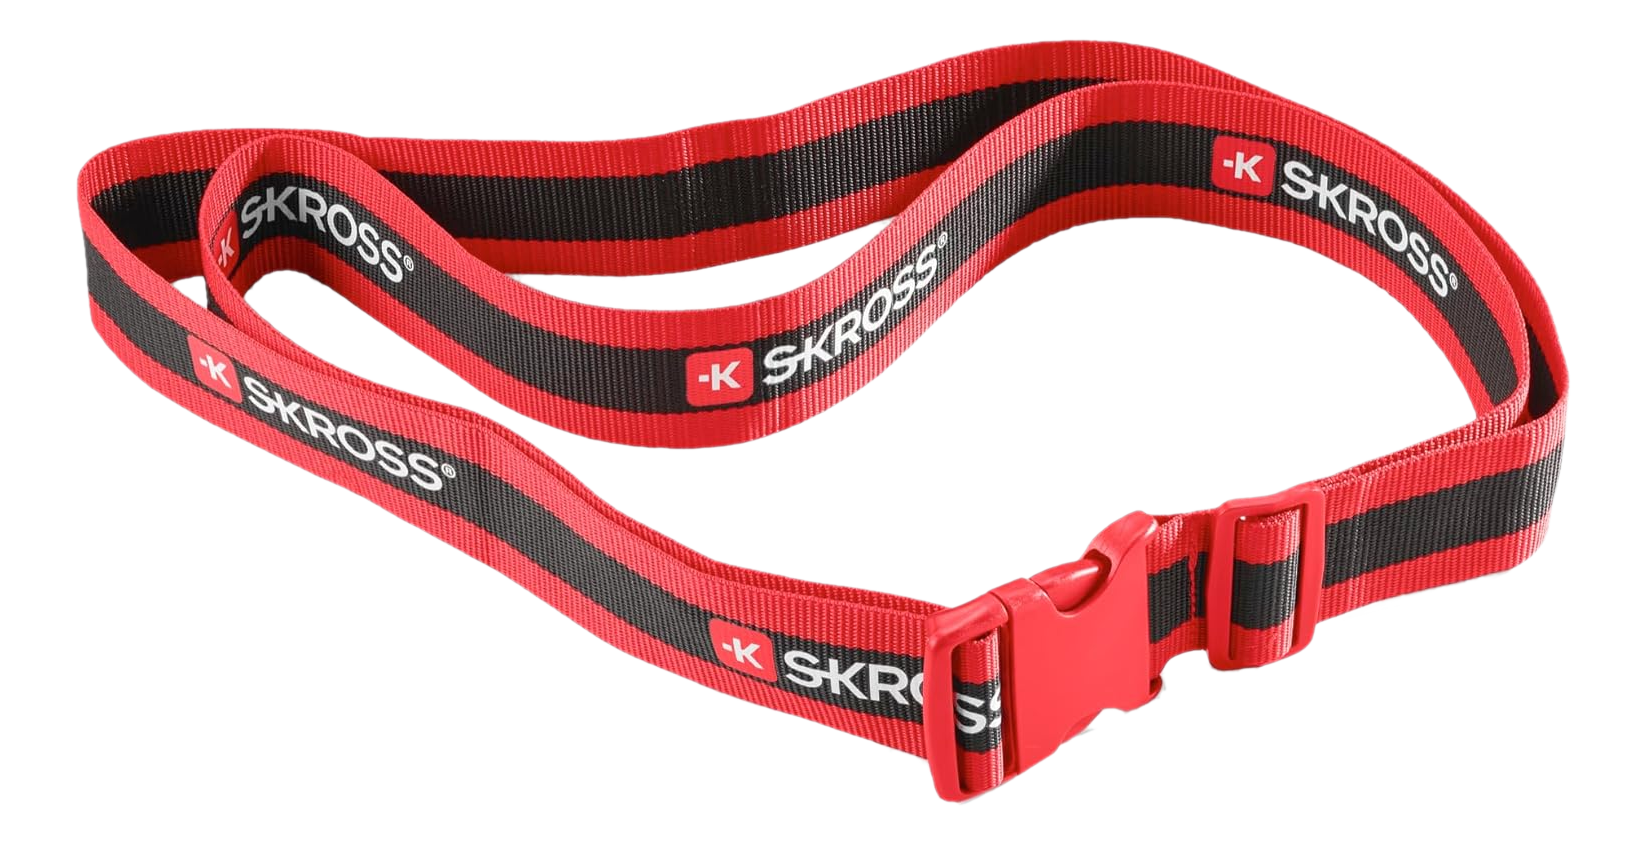 SKROSS Luggage Strap - Sangle pour bagage (Rouge)